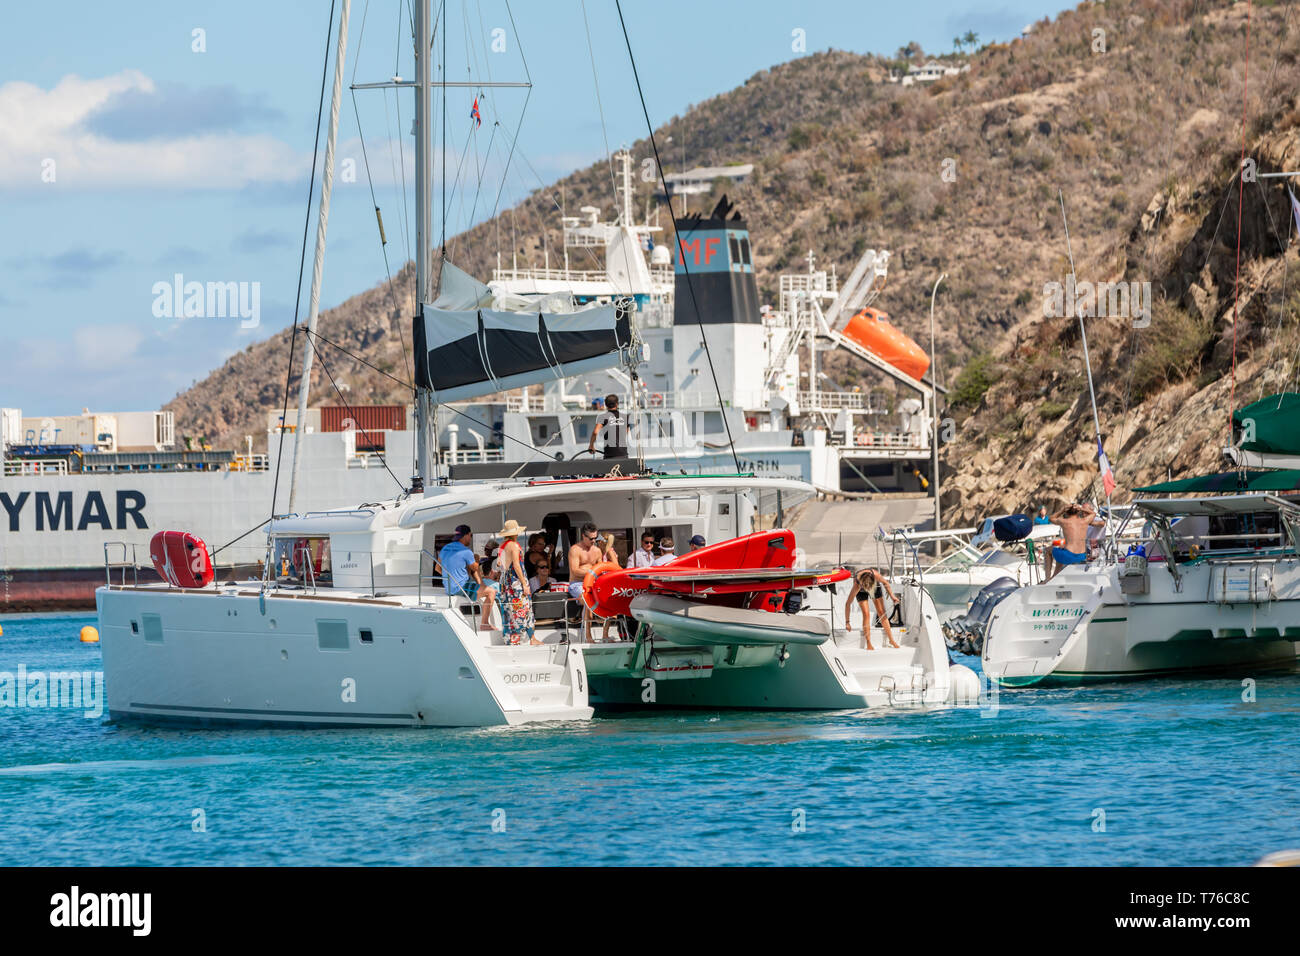 sail boat with people on board, Gustavia, St Barts Stock Photo